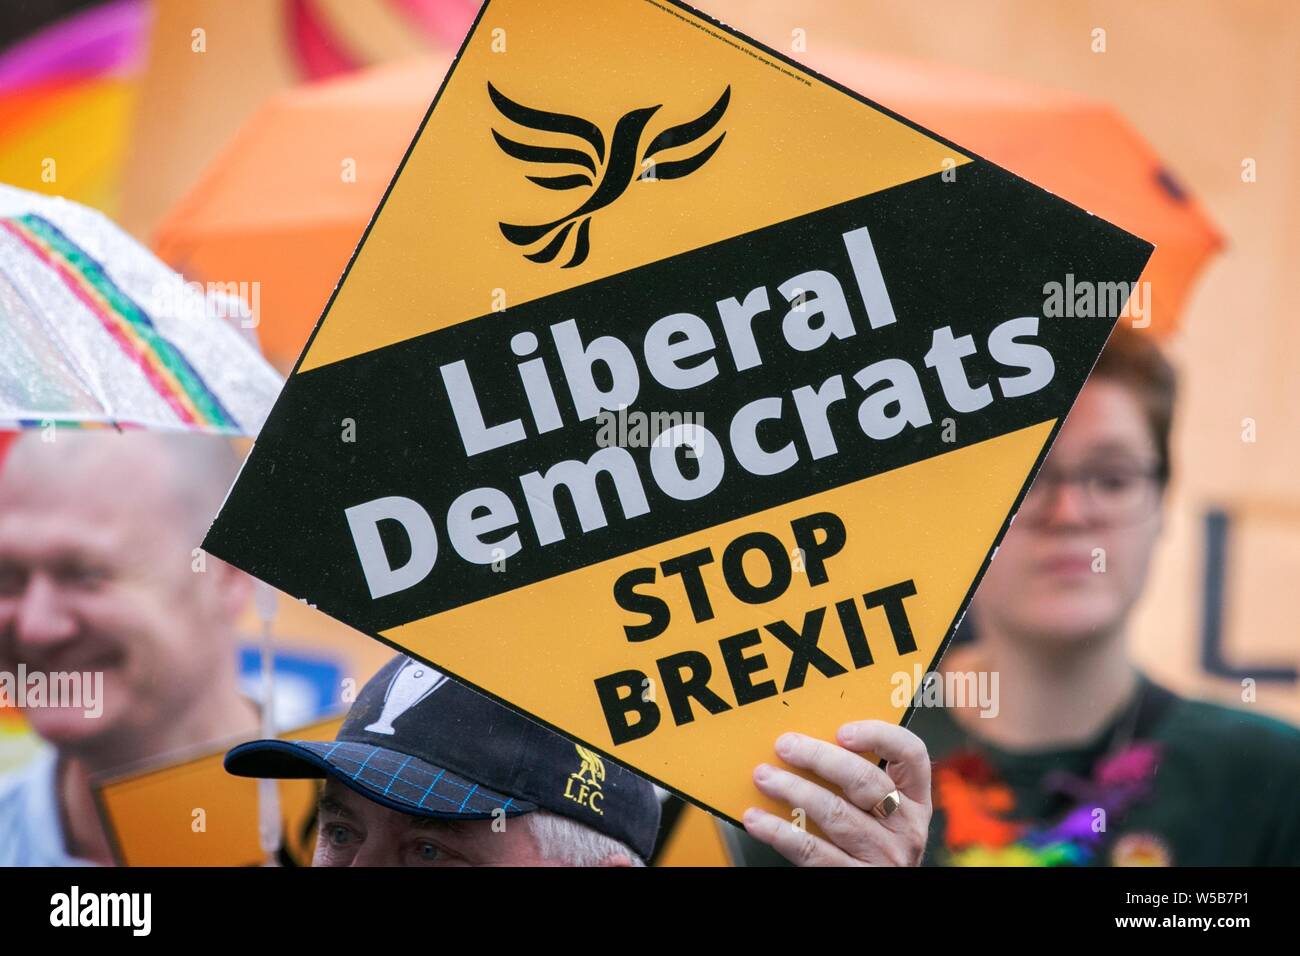 Liberal democrats stop brexit campaigning in Liverpool, Merseyside, UK Stock Photo